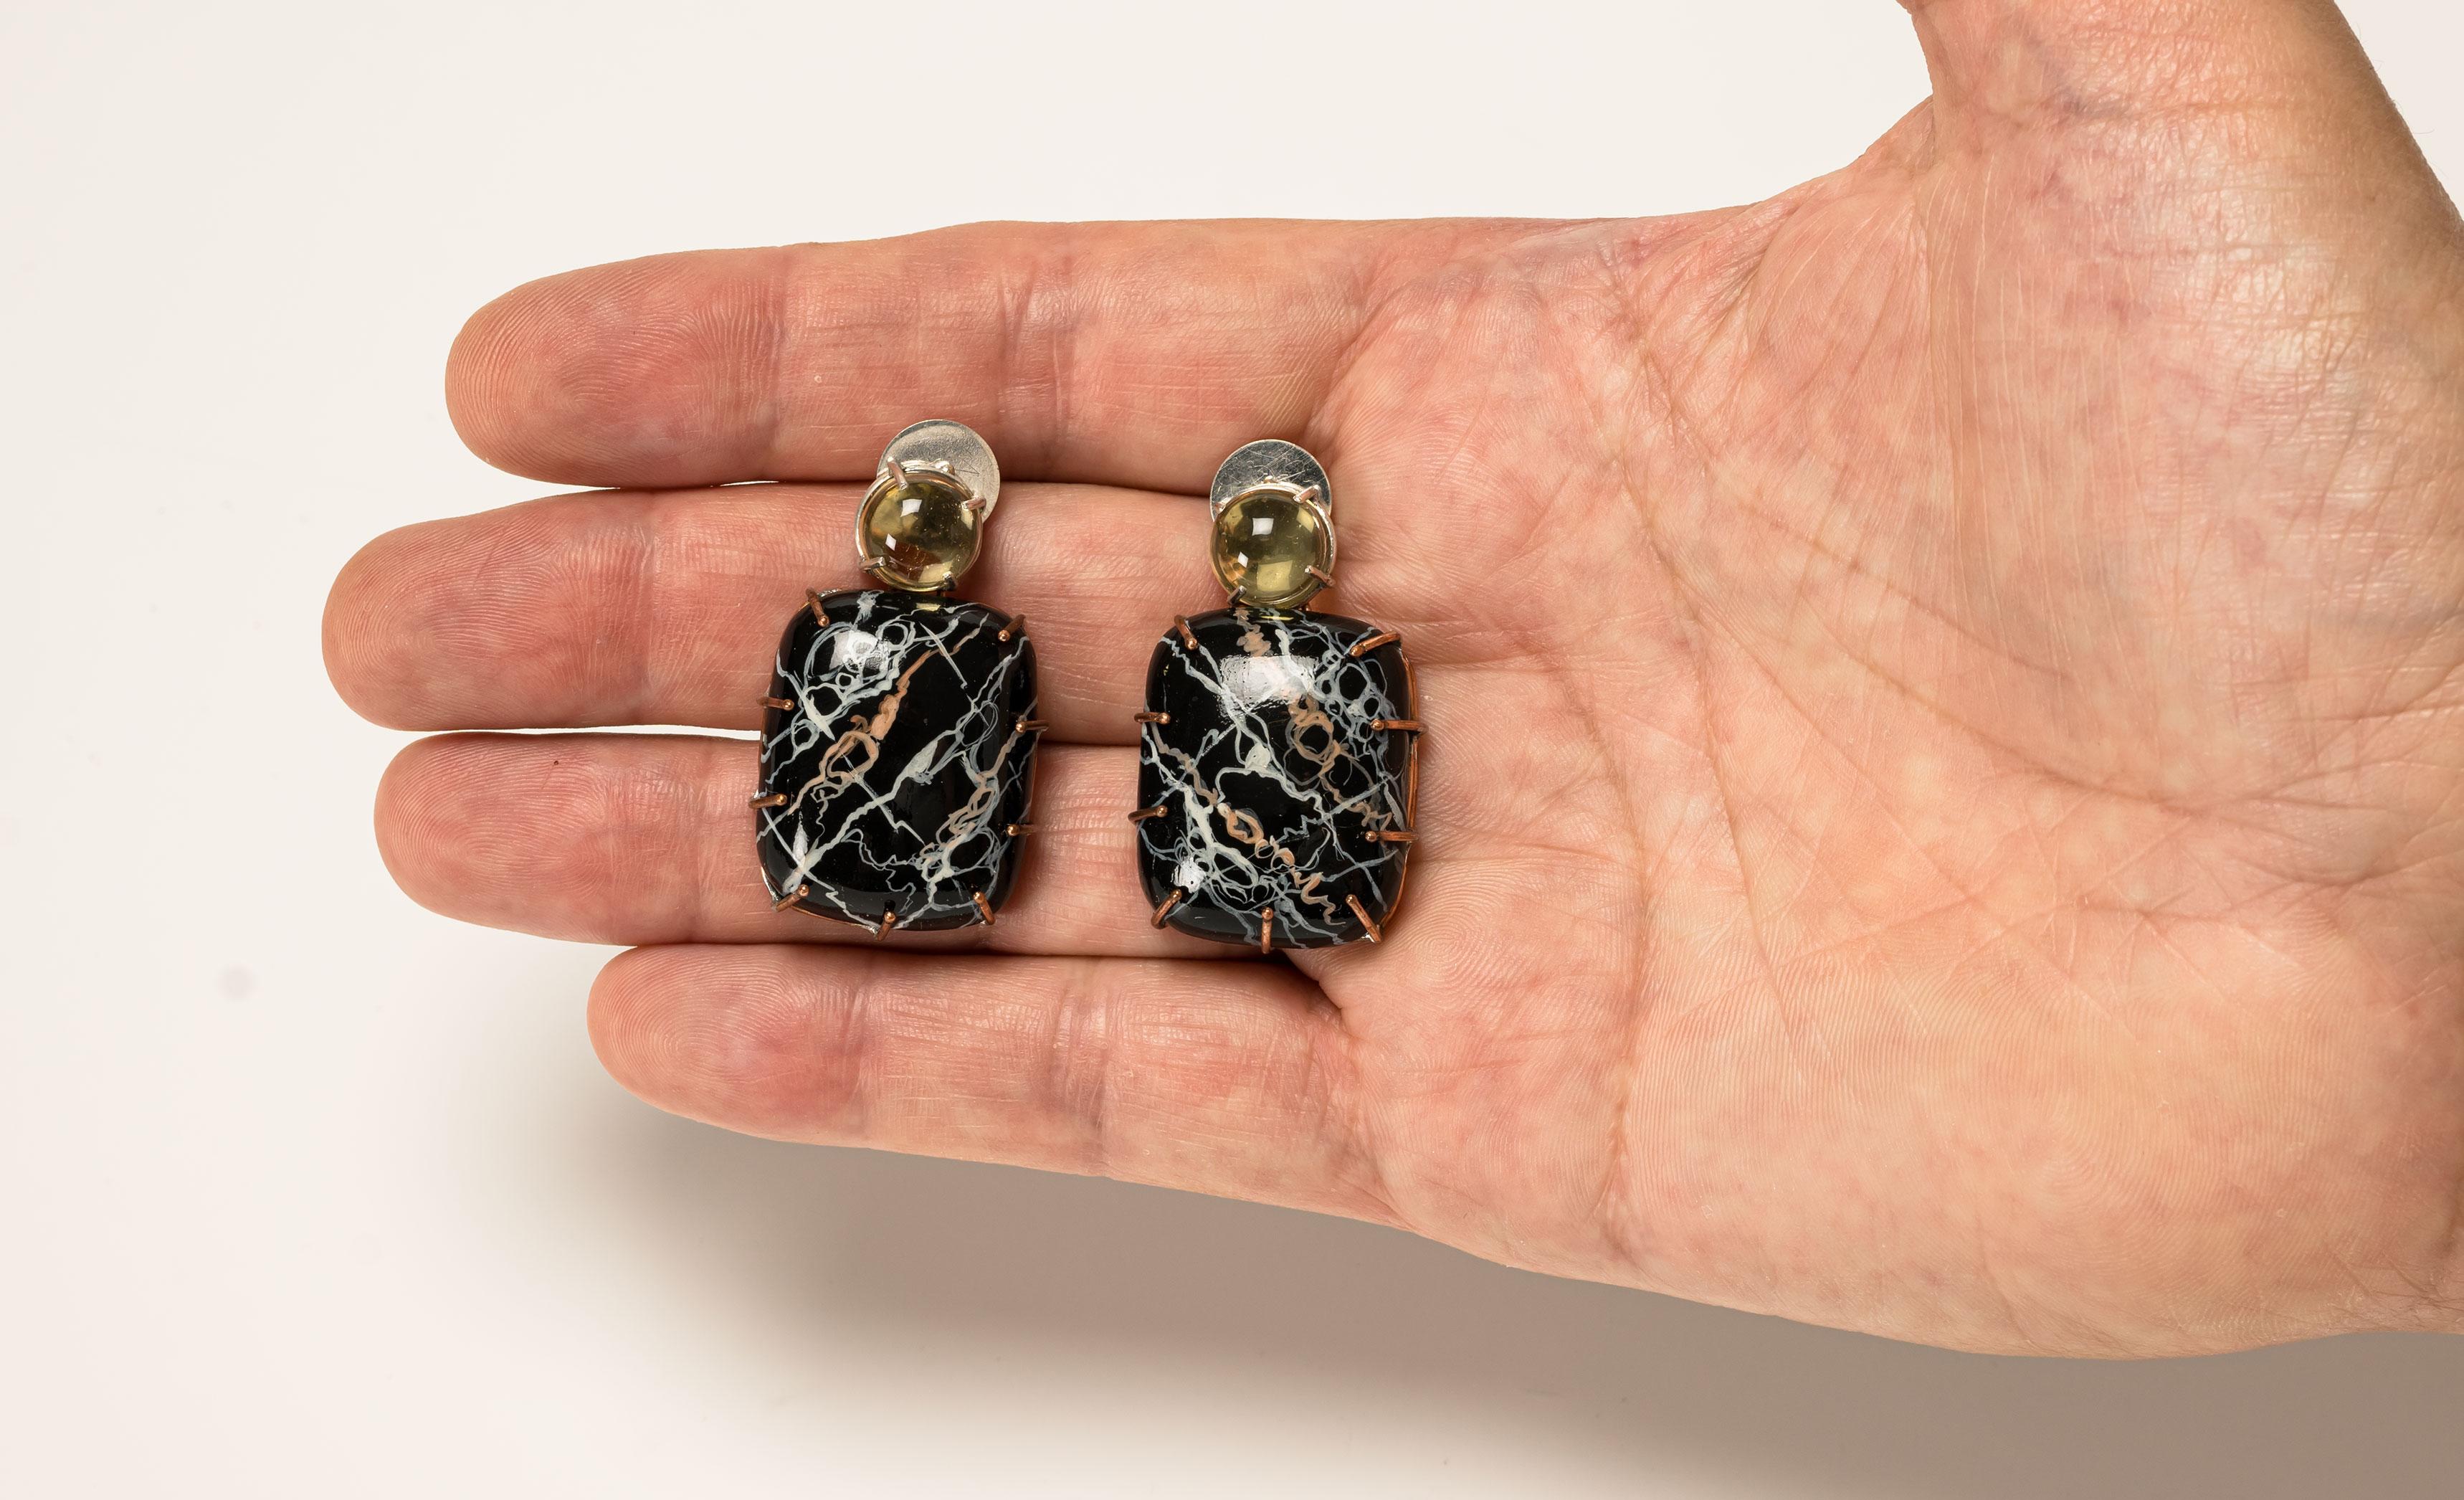 Earrings “Mimos”, 2022, are a one-of-a-kind contemporary author jewelry by italian artist Gian Luca Bartellone.
Materials: papier-mâché, gold 18kt, silver, copper, citrines.


The main body is made of papier-mâché and painted by hand with